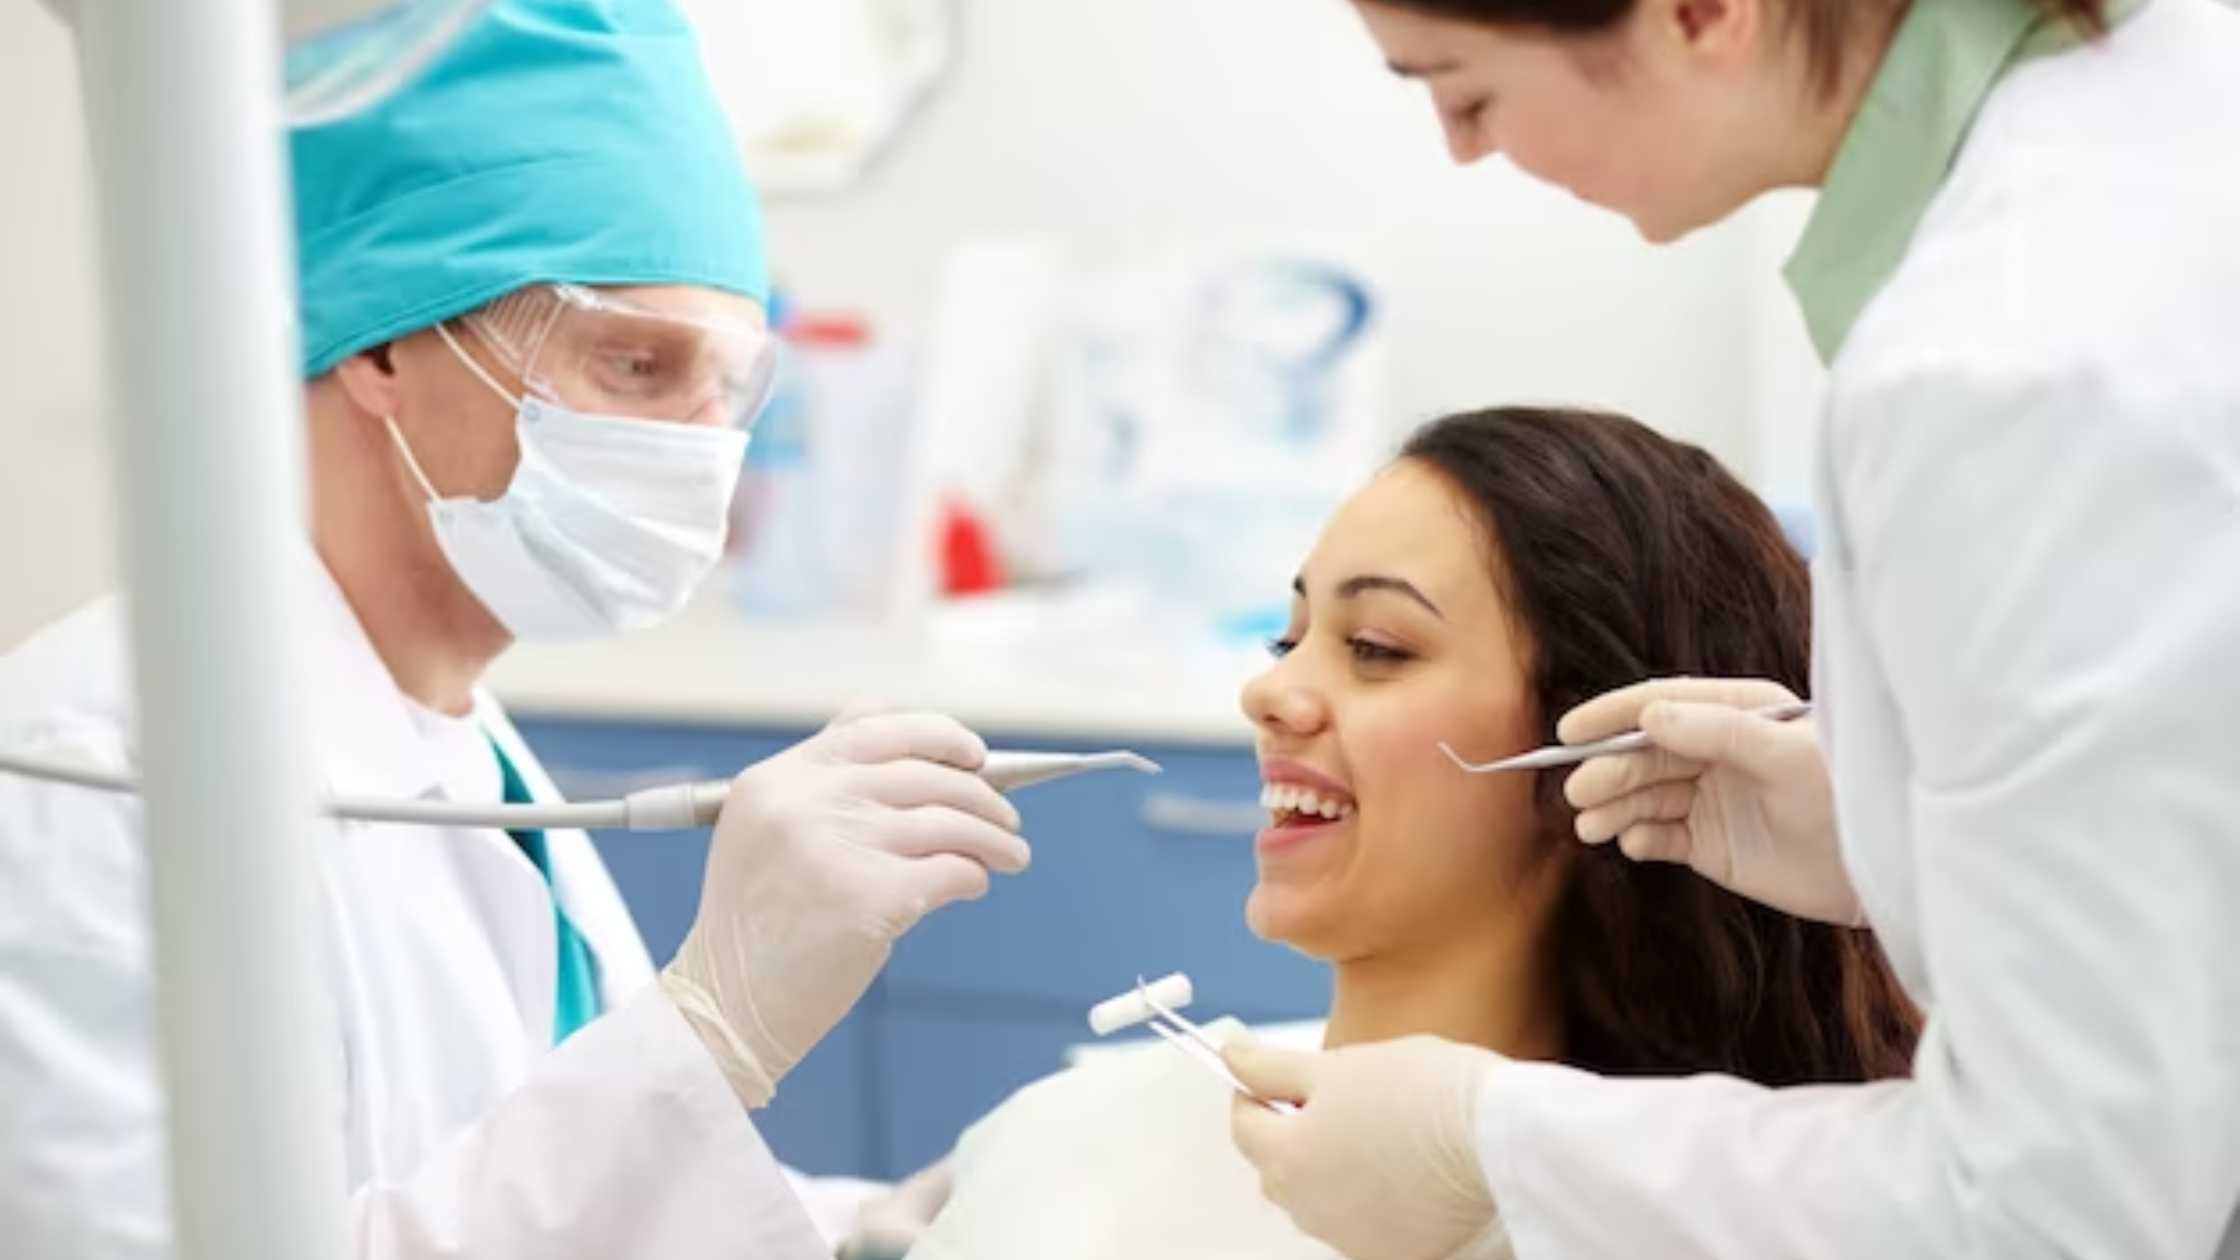 How to Determine Which Service You Need Bright Horizons Dental